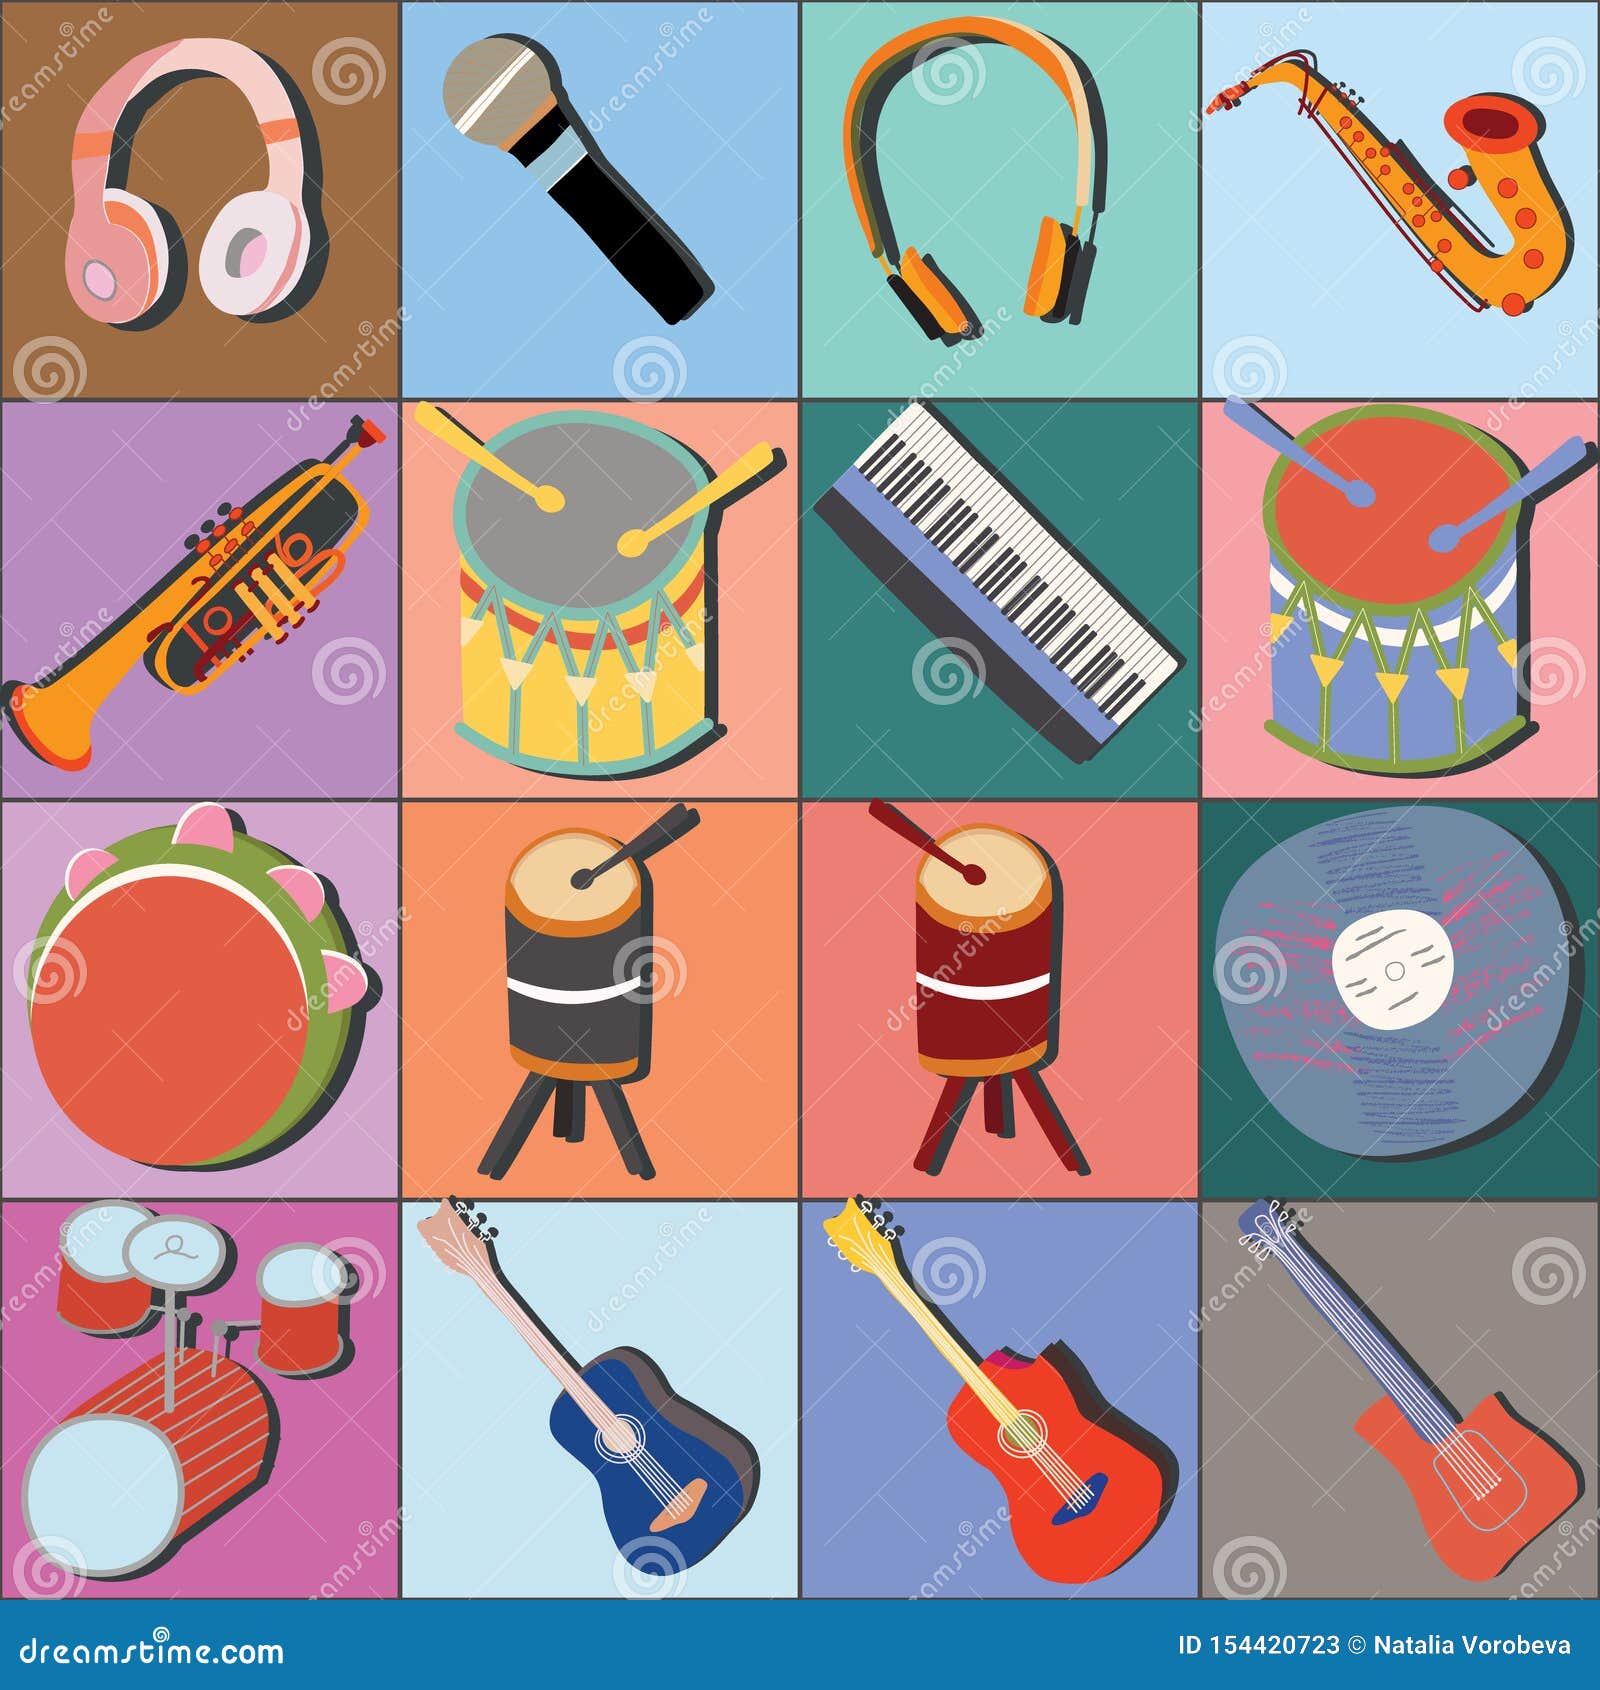 Page 2 | Music instrument drawing Vectors & Illustrations for Free Download  | Freepik